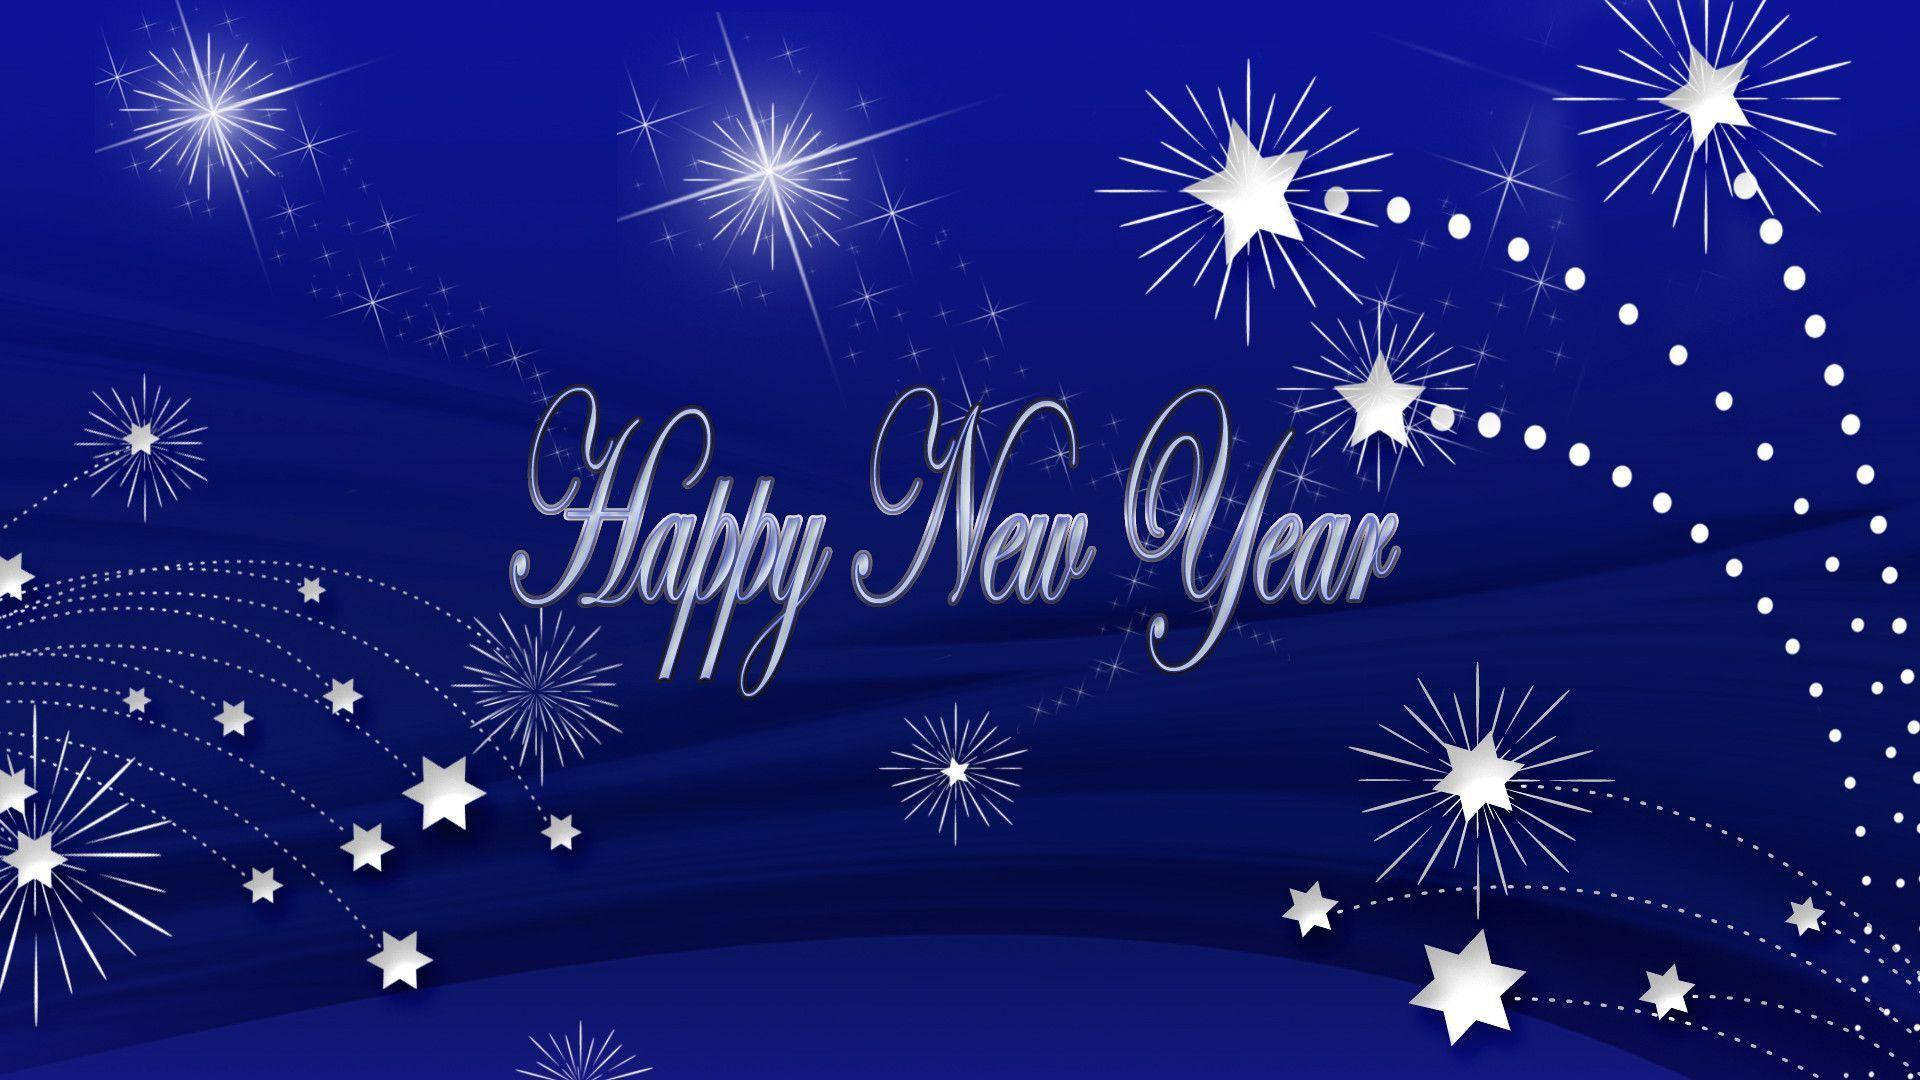 Starry Happy New Year 2021 Greeting Background